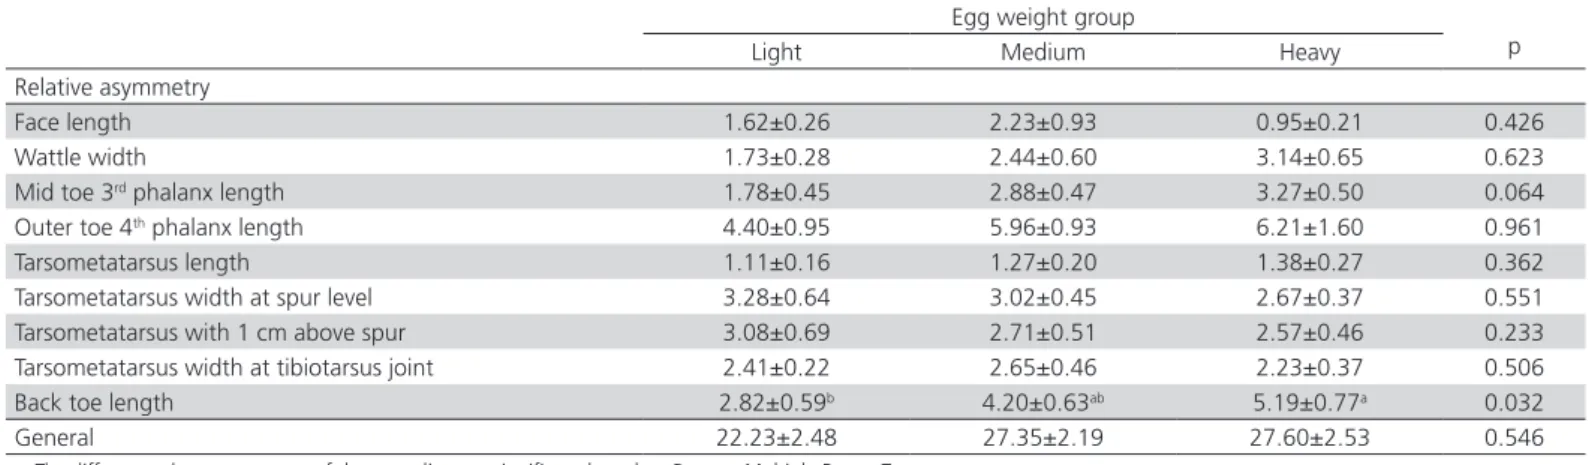 Table 5 – The effect of egg weight on fluctuating asymmetry.